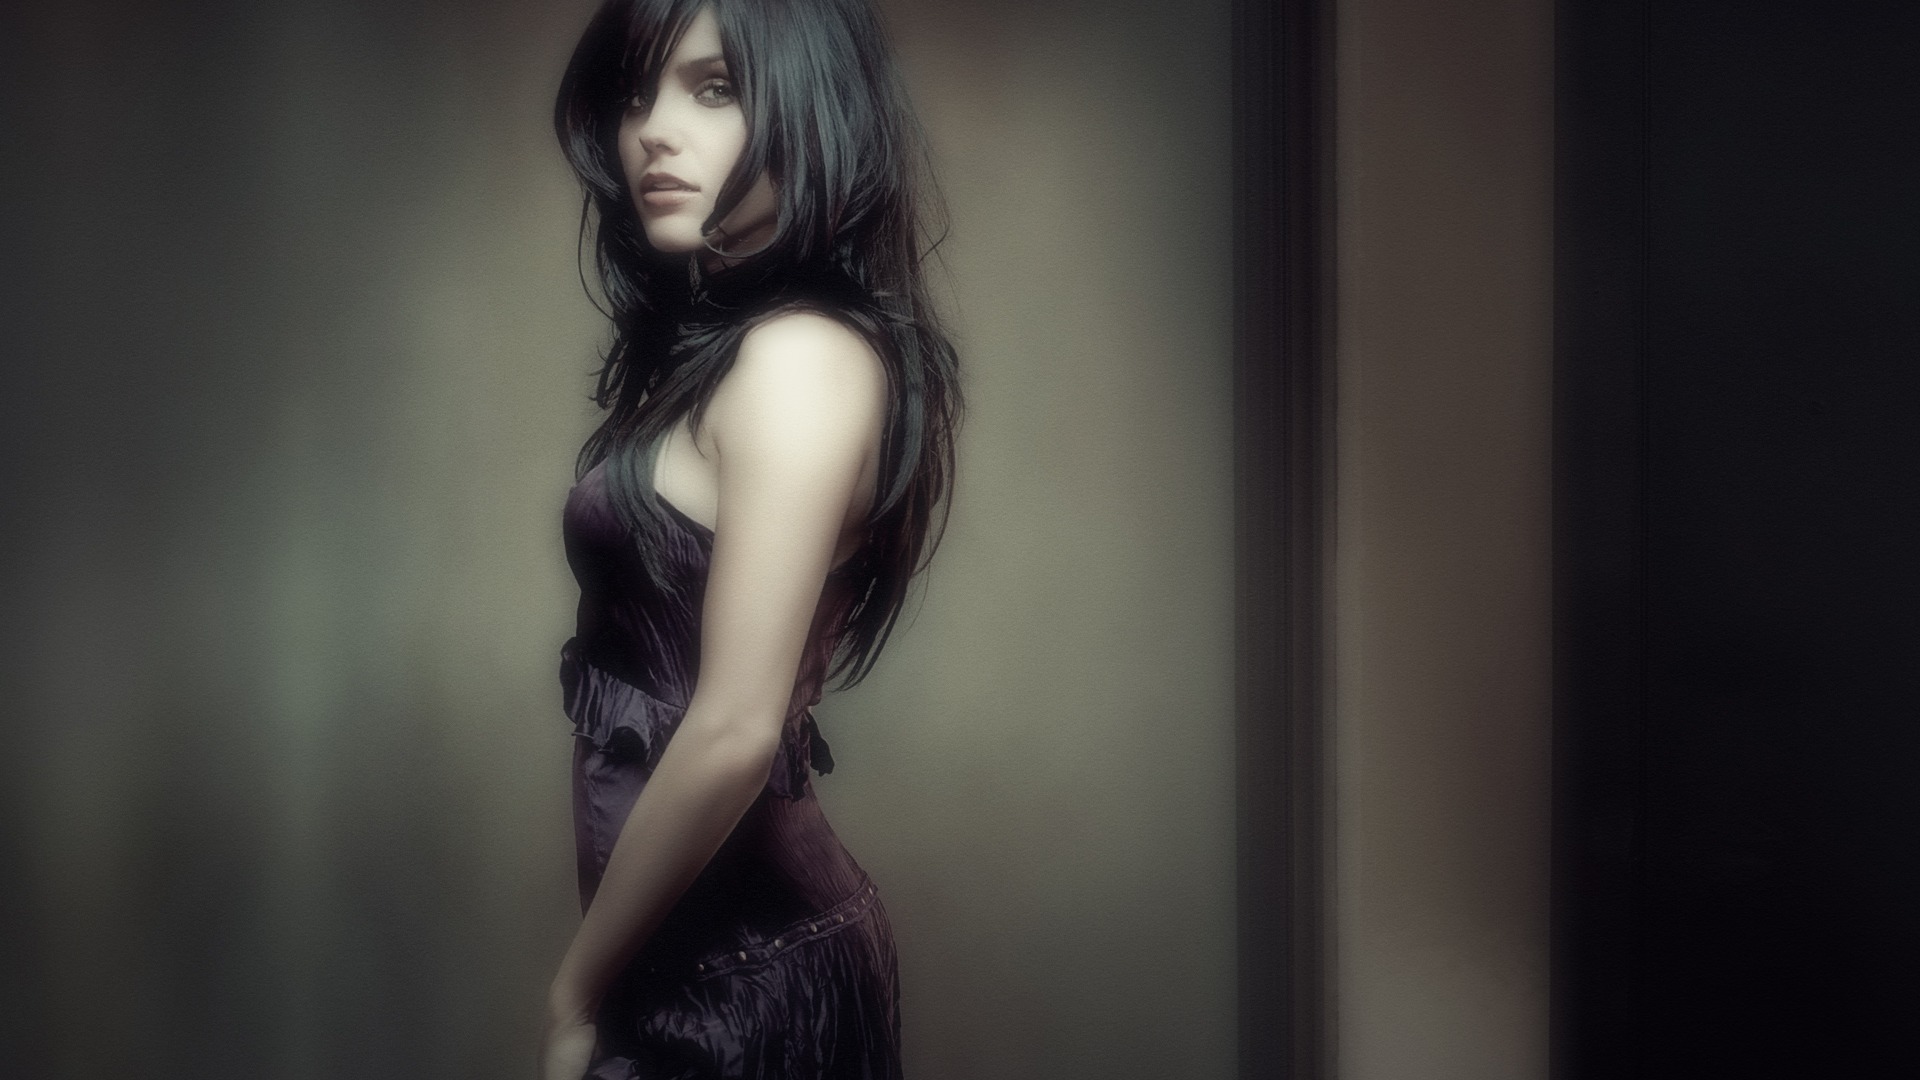 Widescreen Wallpaper Collection actrice (7) #16 - 1920x1080